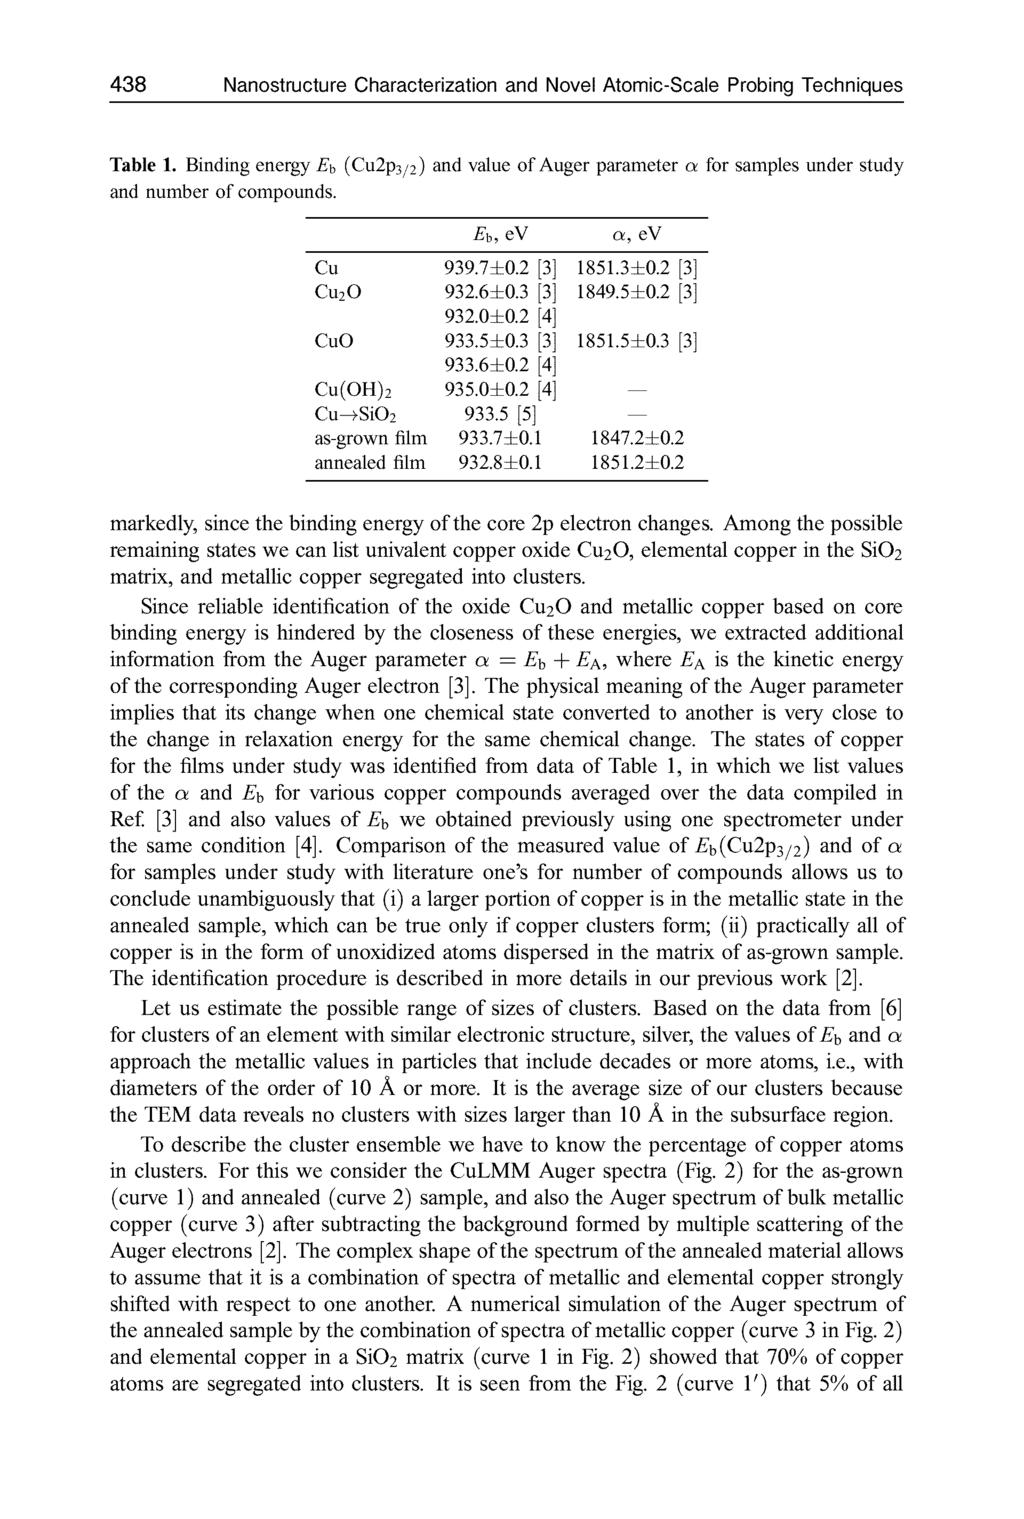 438 Nanostructure Characterization and Novel Atomic-Scale Probing Techniques Table 1. Binding energy Eb (Cu2p 3 / 2 ) and value of Auger parameter a for samples under study and number of compounds.